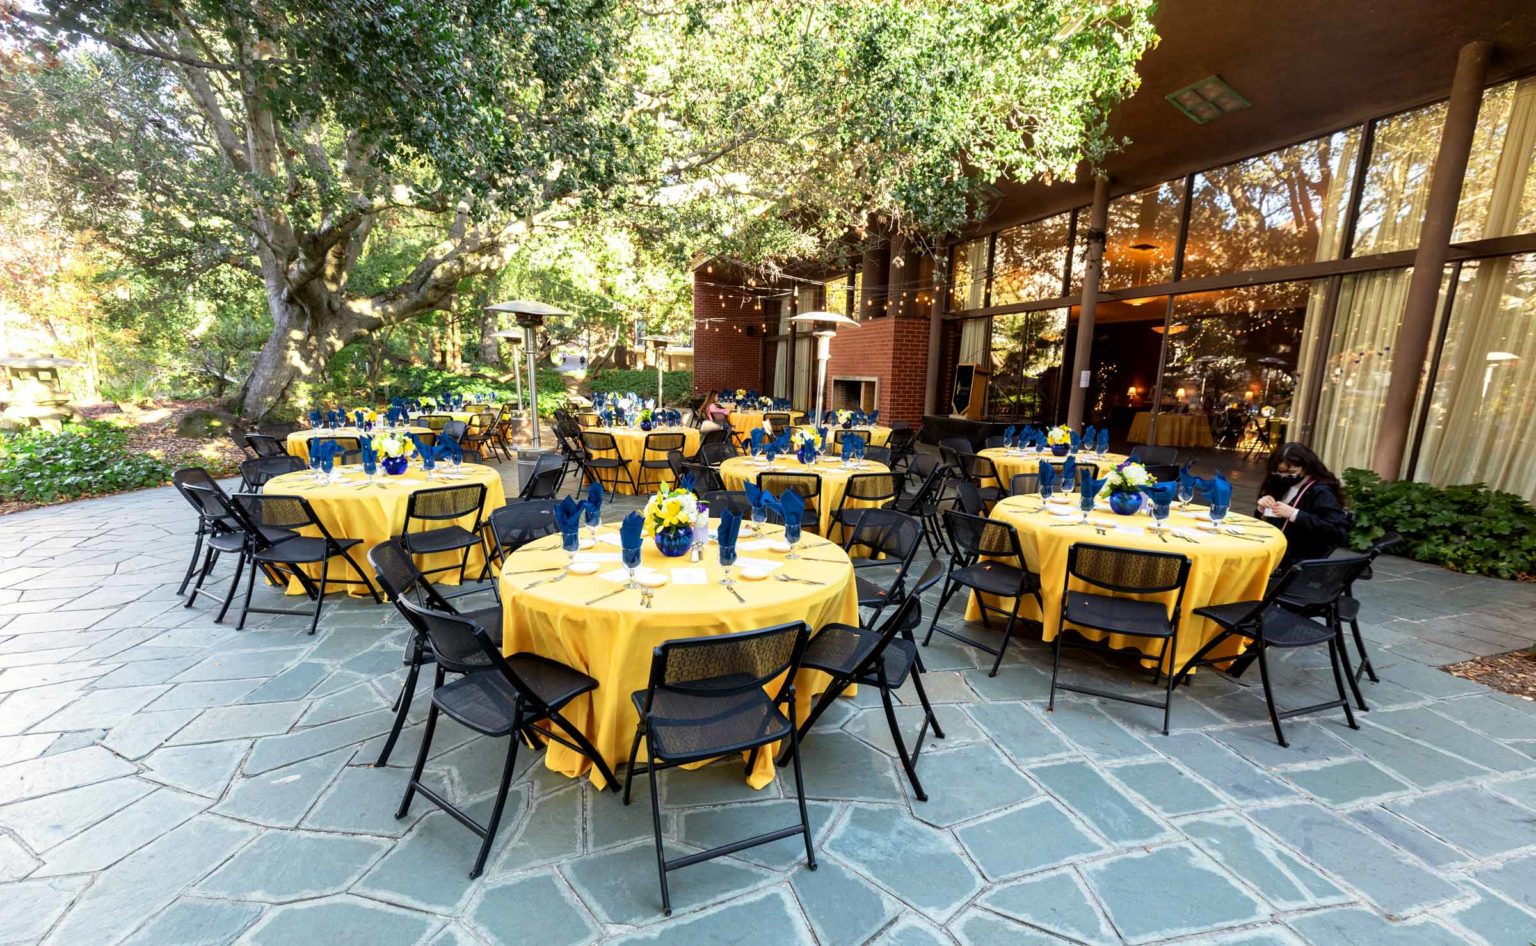 tables set for an event on the alumni house patio